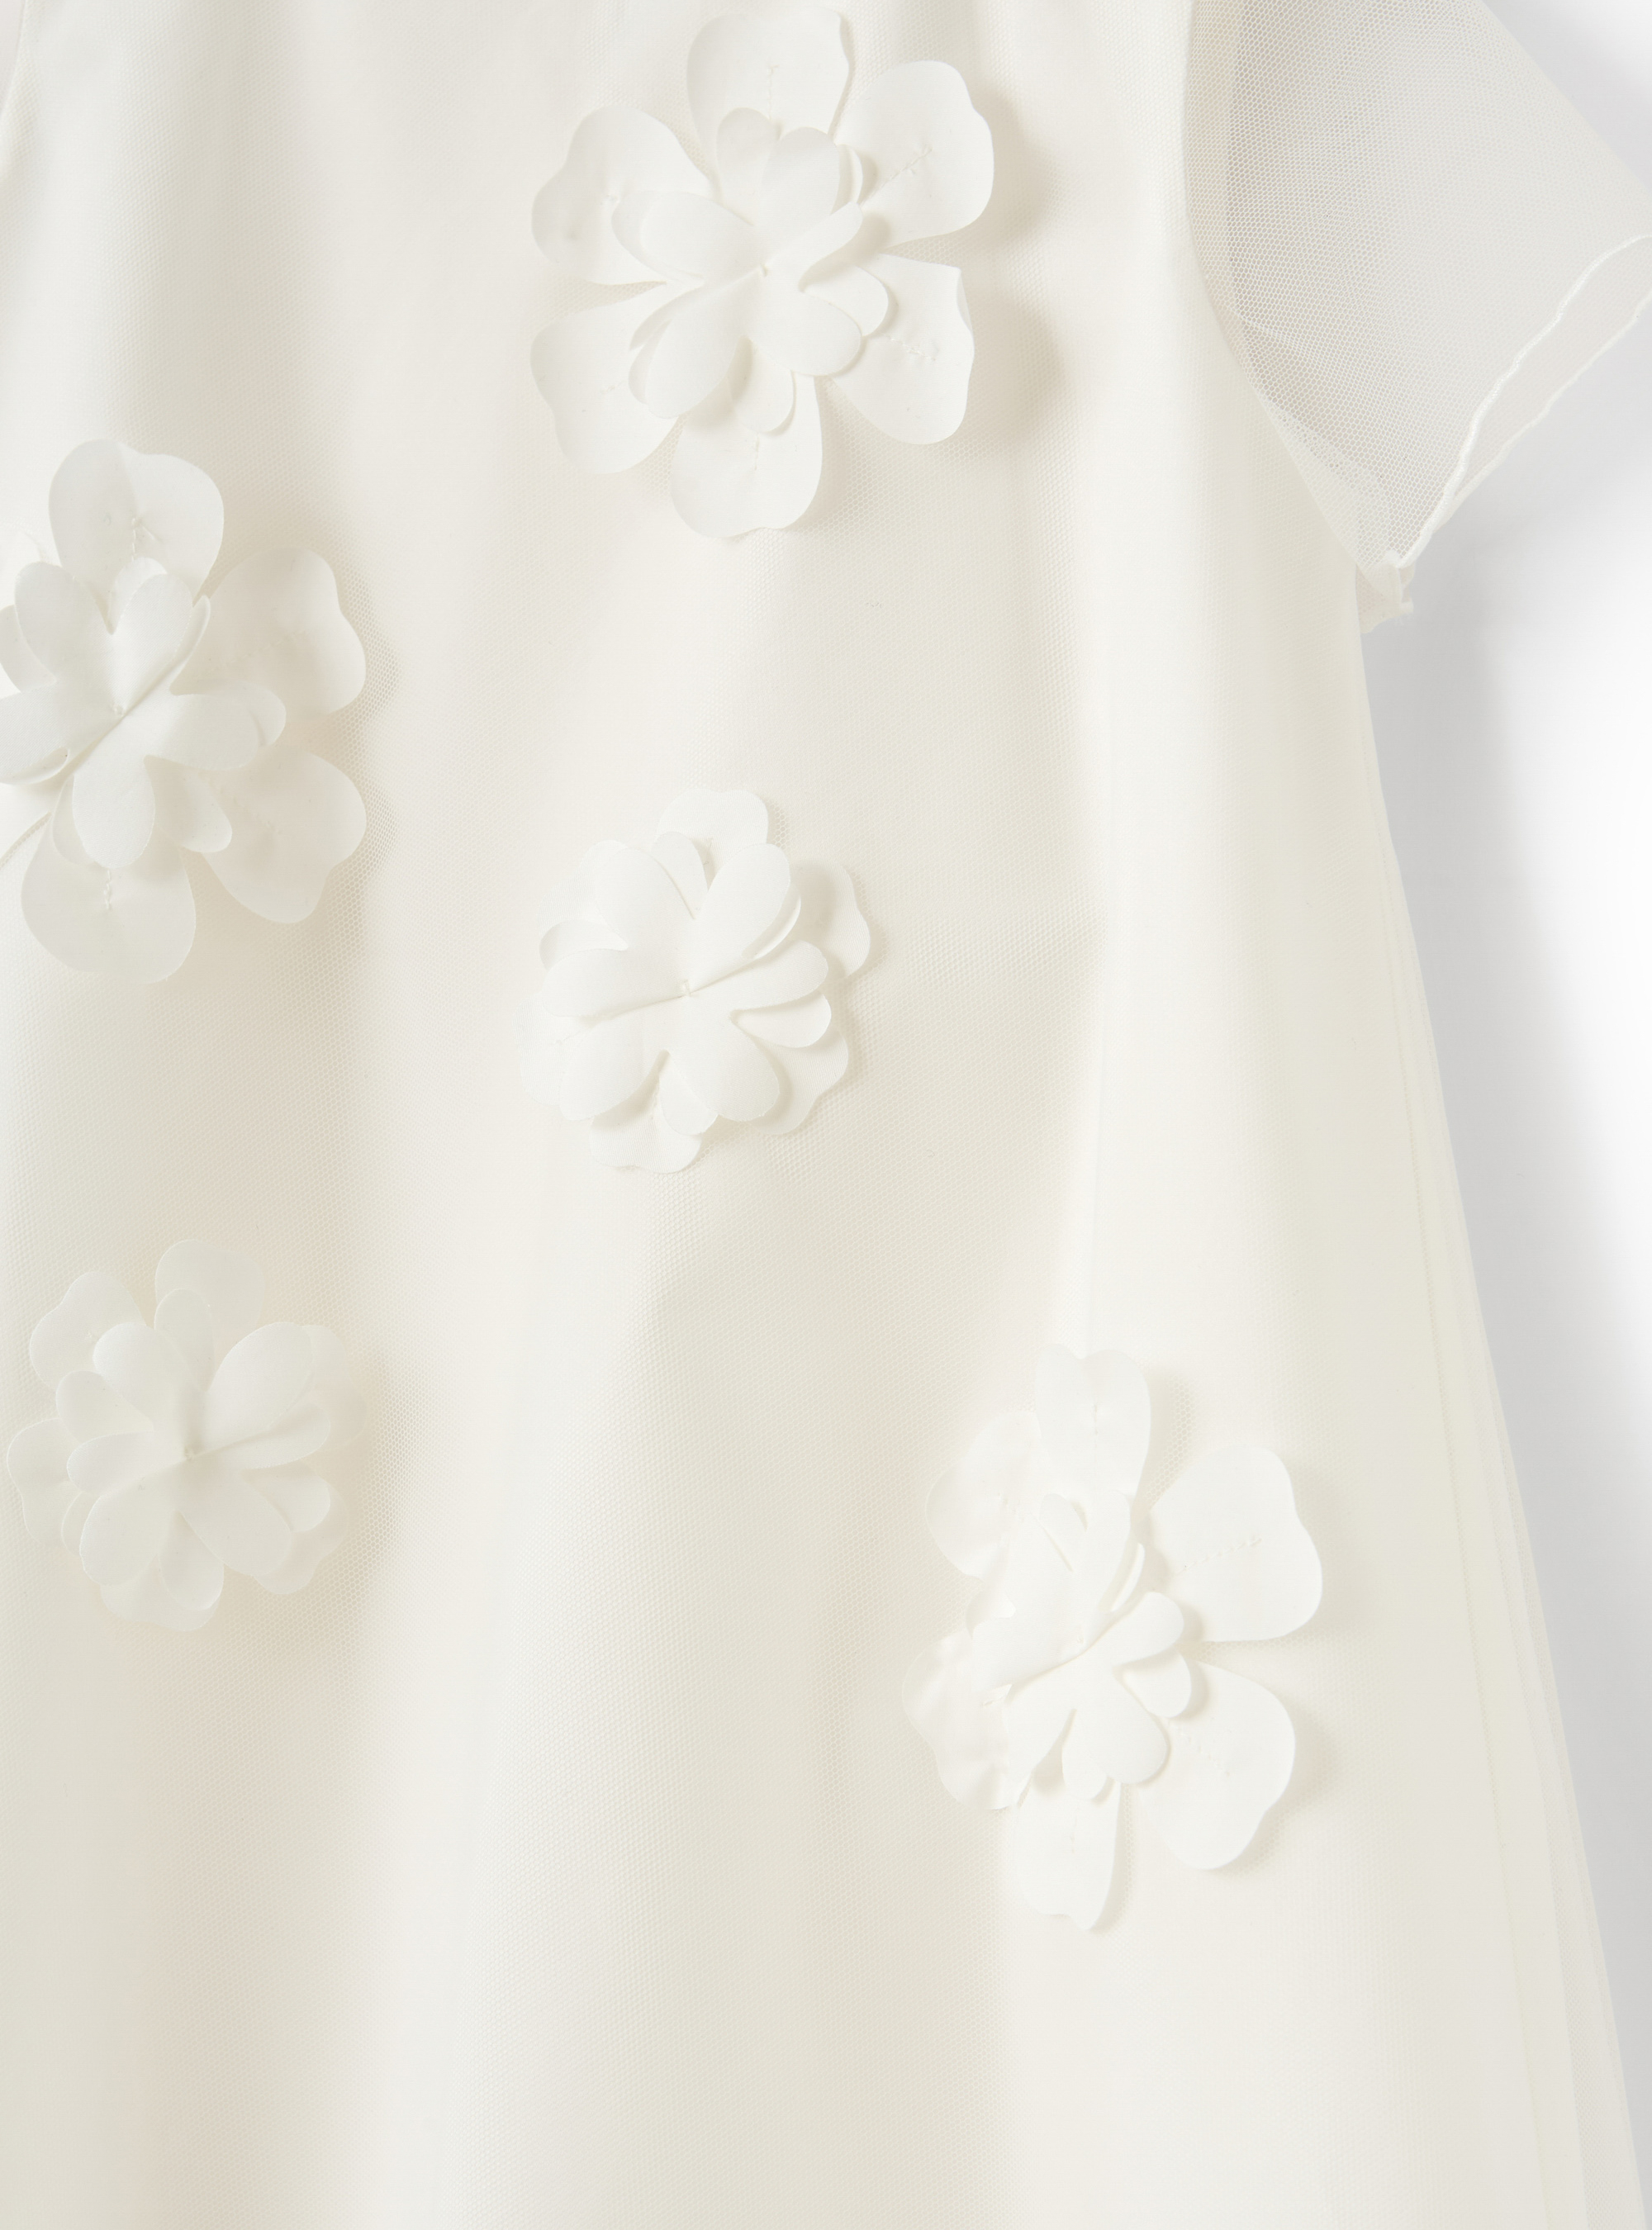 Tulle dress with applied flowers - White | Il Gufo